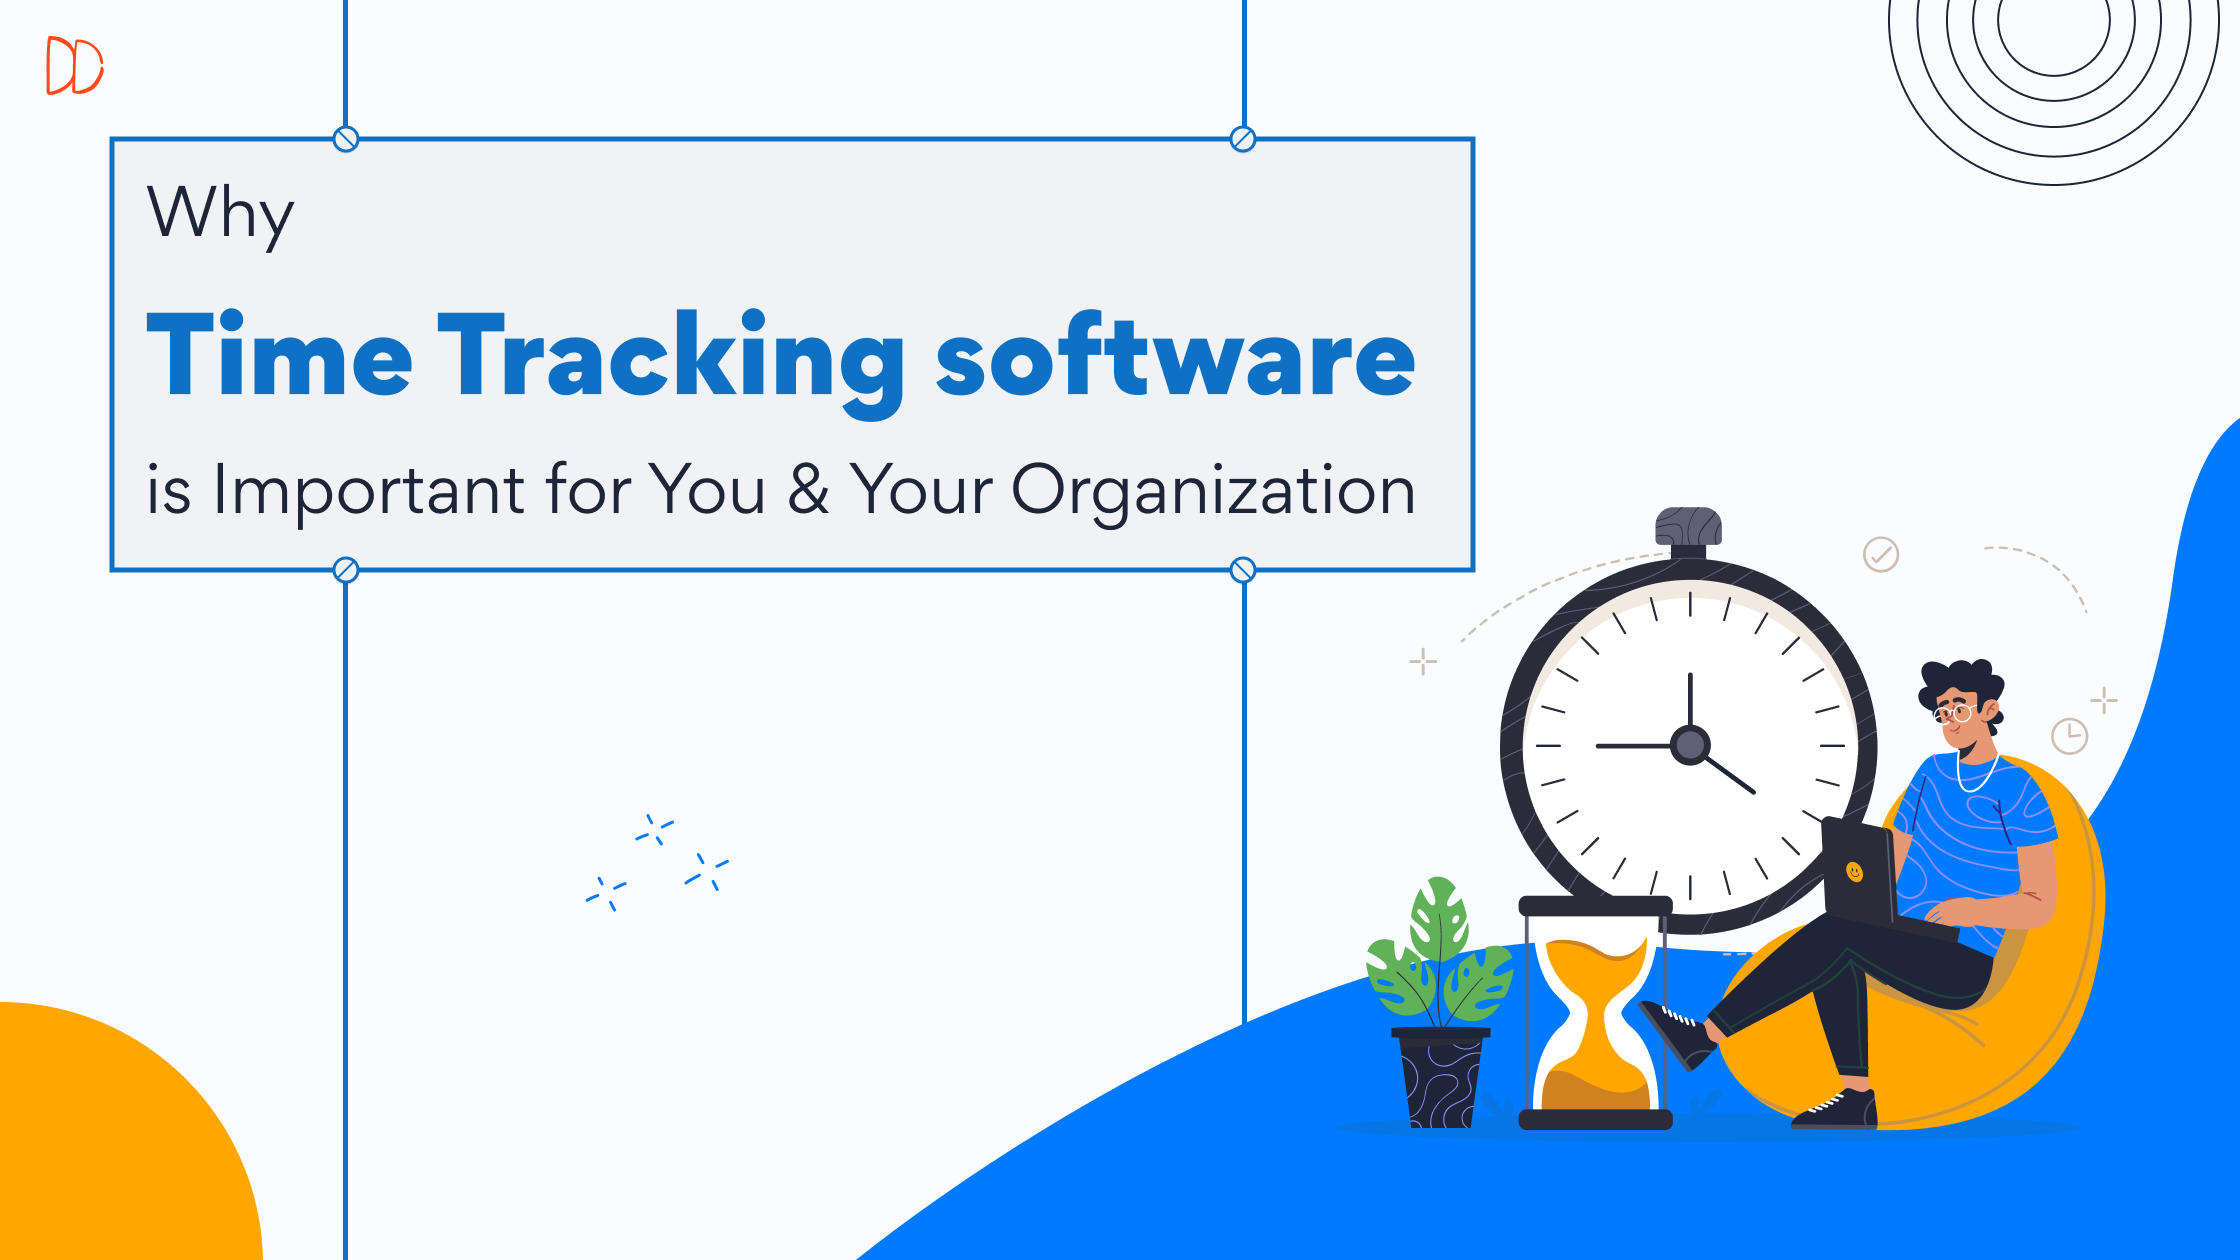 Time Tracking software